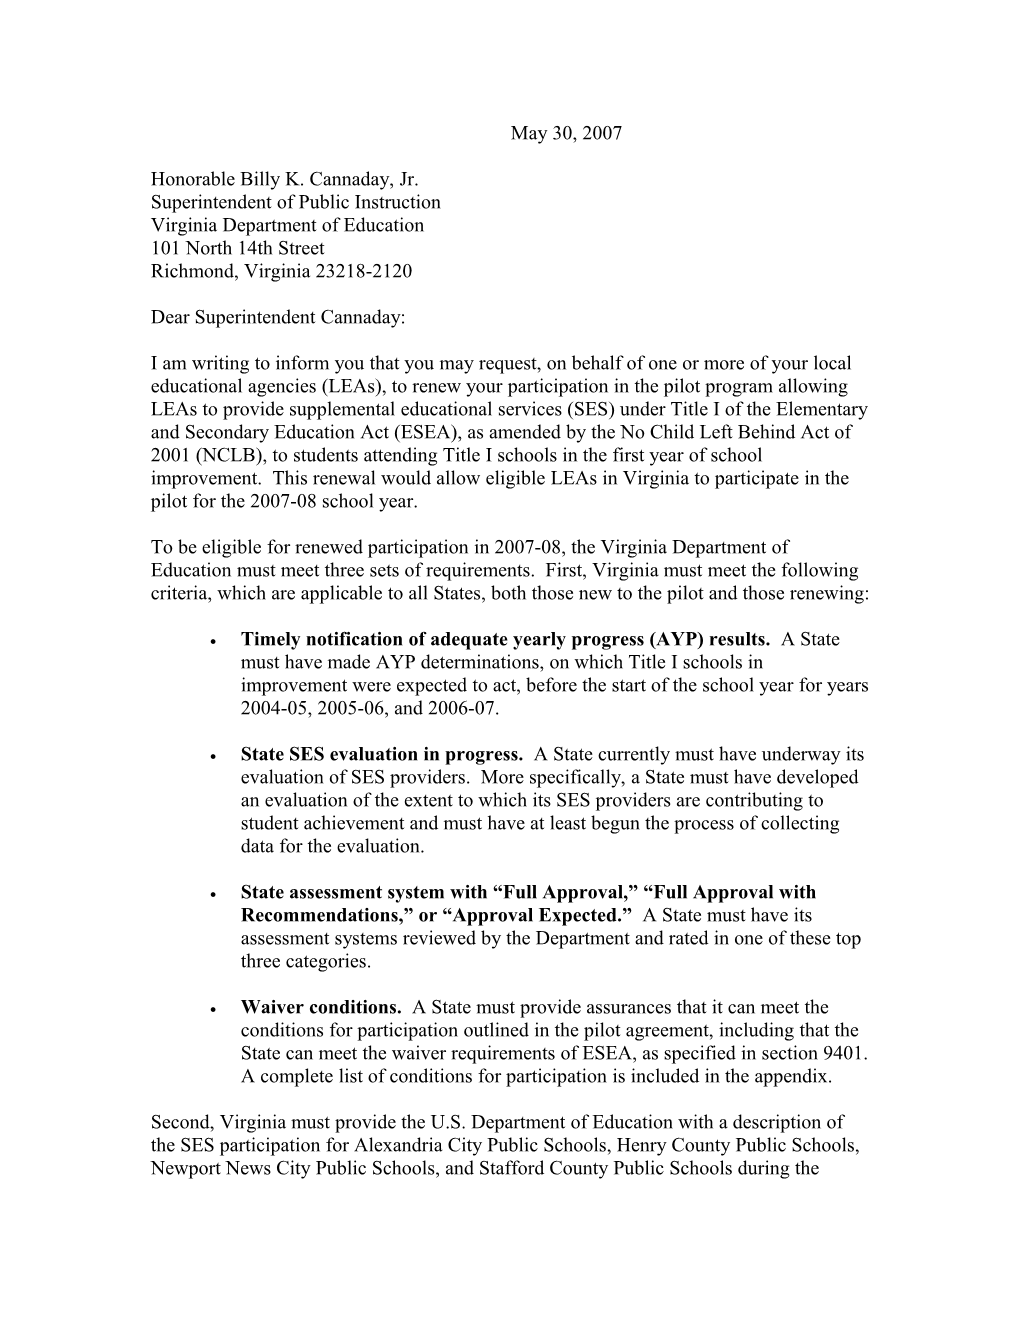 Renewal Letter to VA to Reapply for SES Pilot Program (MS Word)